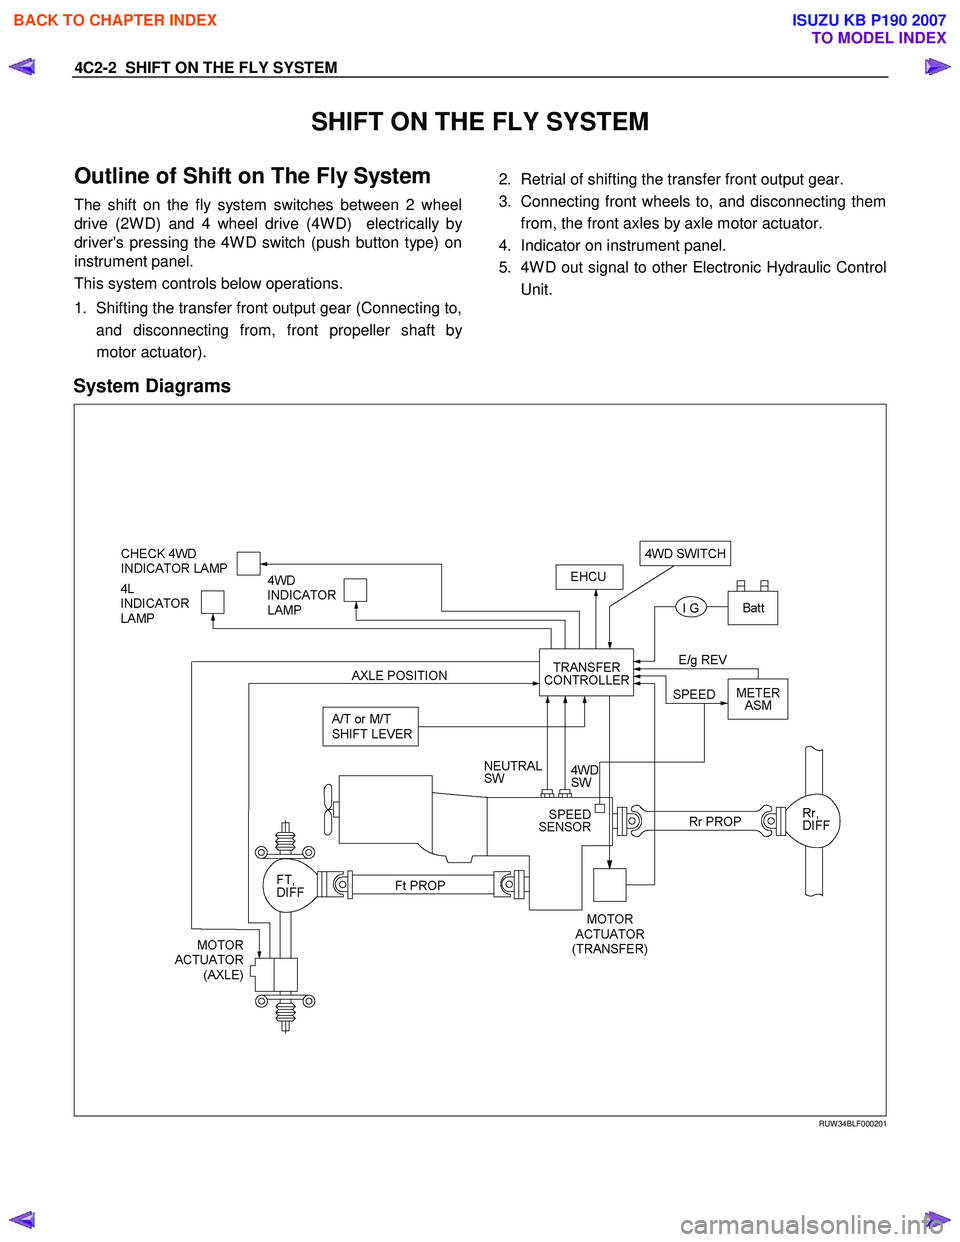 ISUZU KB P190 2007  Workshop Repair Manual 4C2-2  SHIFT ON THE FLY SYSTEM 
SHIFT ON THE FLY SYSTEM 
Outline of Shift on The Fly System  
The shift on the fly system switches between 2 wheel 
drive (2W D) and 4 wheel drive (4W D)  electrically 